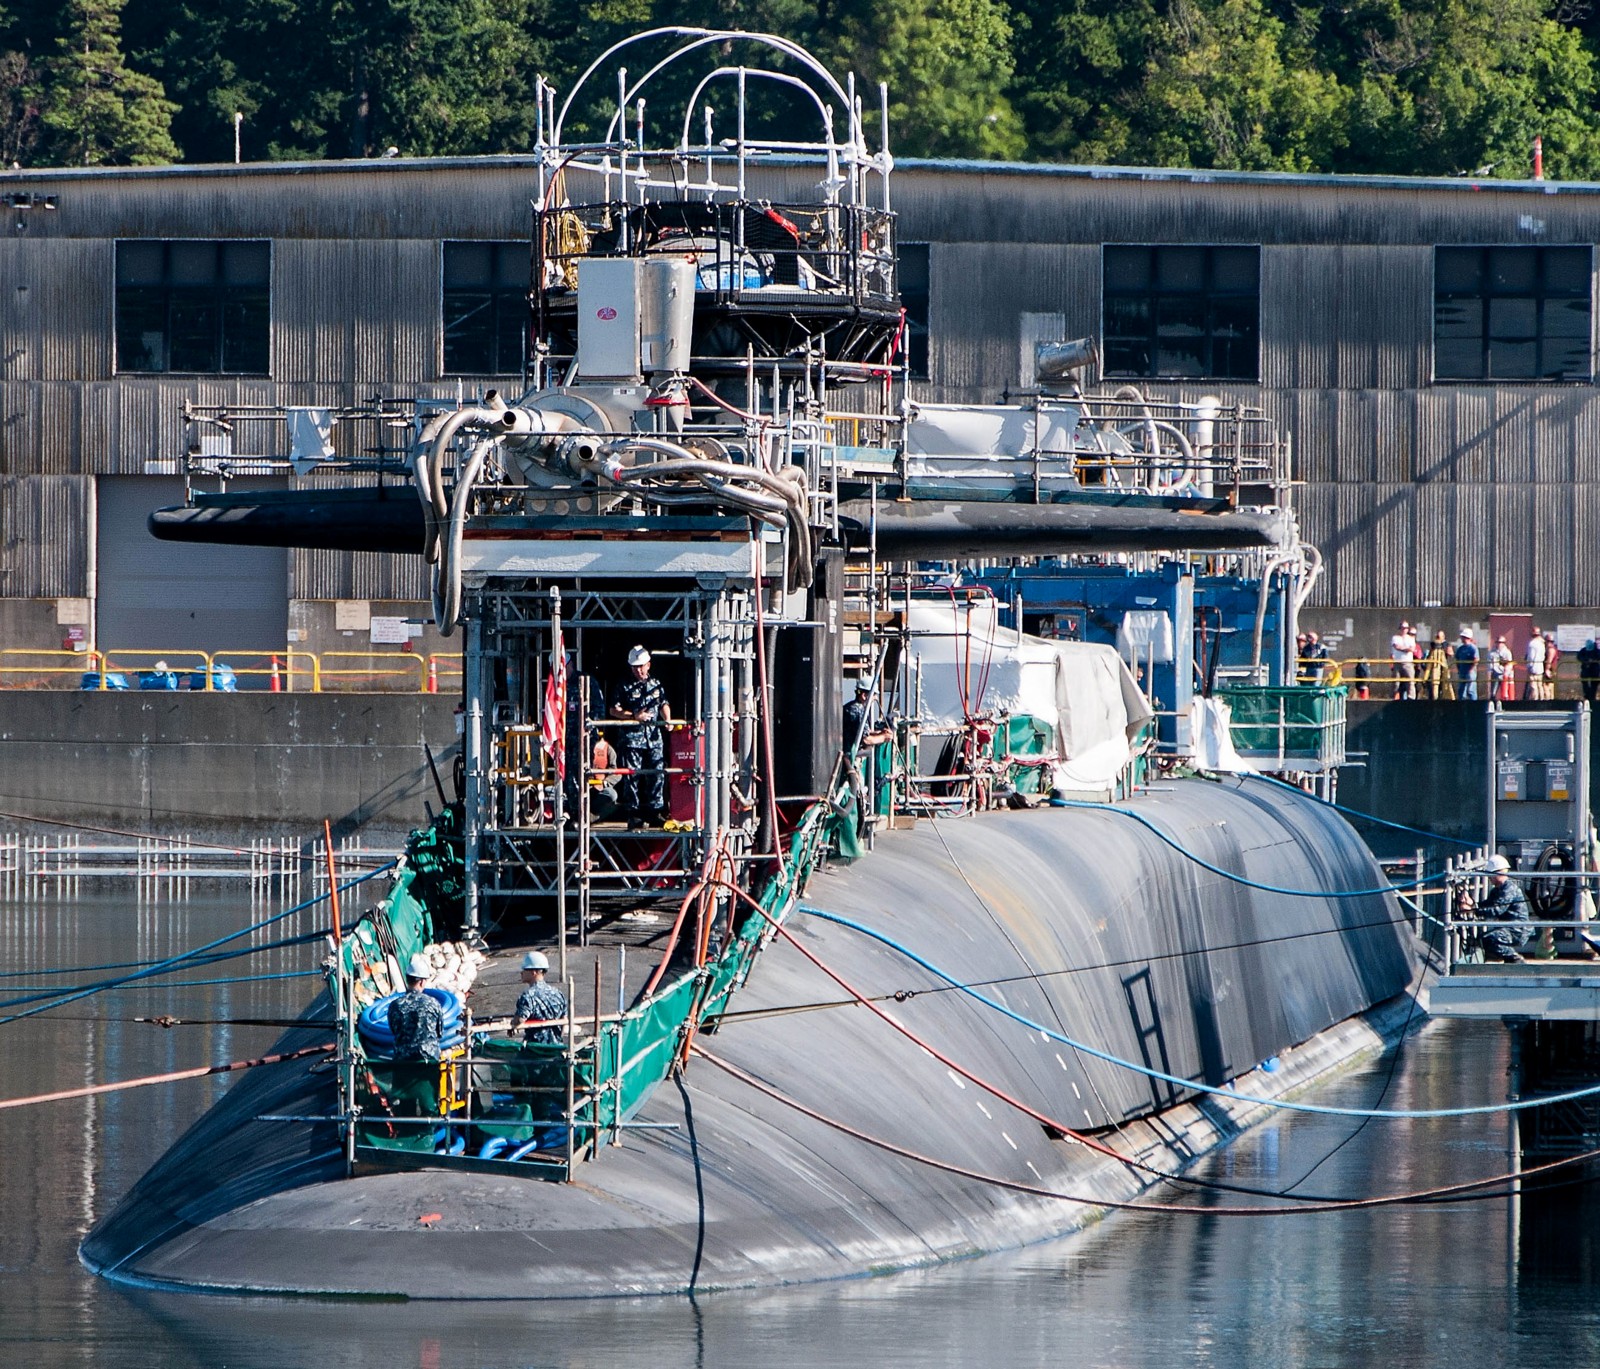 ssgn-726 uss ohio guided missile submarine us navy 2014 23 puget sound naval shipyard bremerton